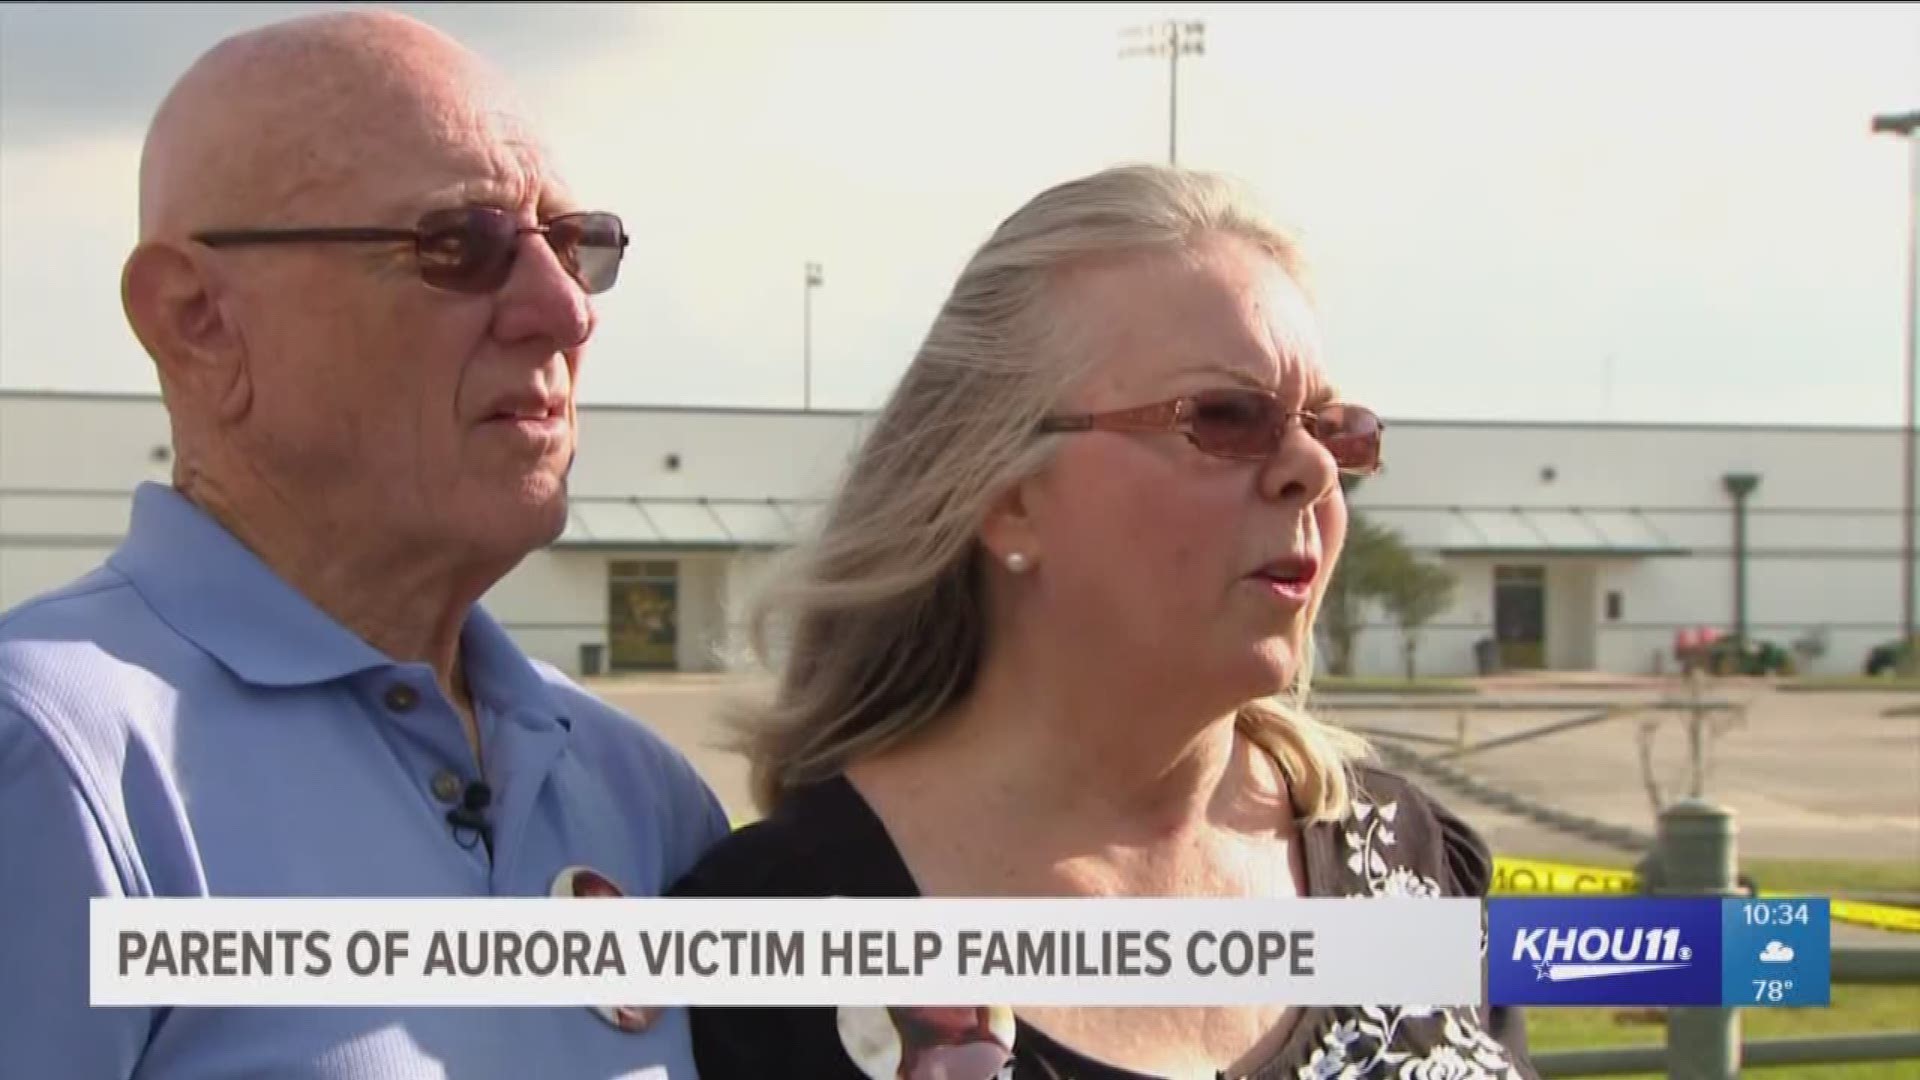 A husband and wife, whose daughter died in the 2012 Aurora shooting, traveled to Santa Fe to help the families cope with the devastation